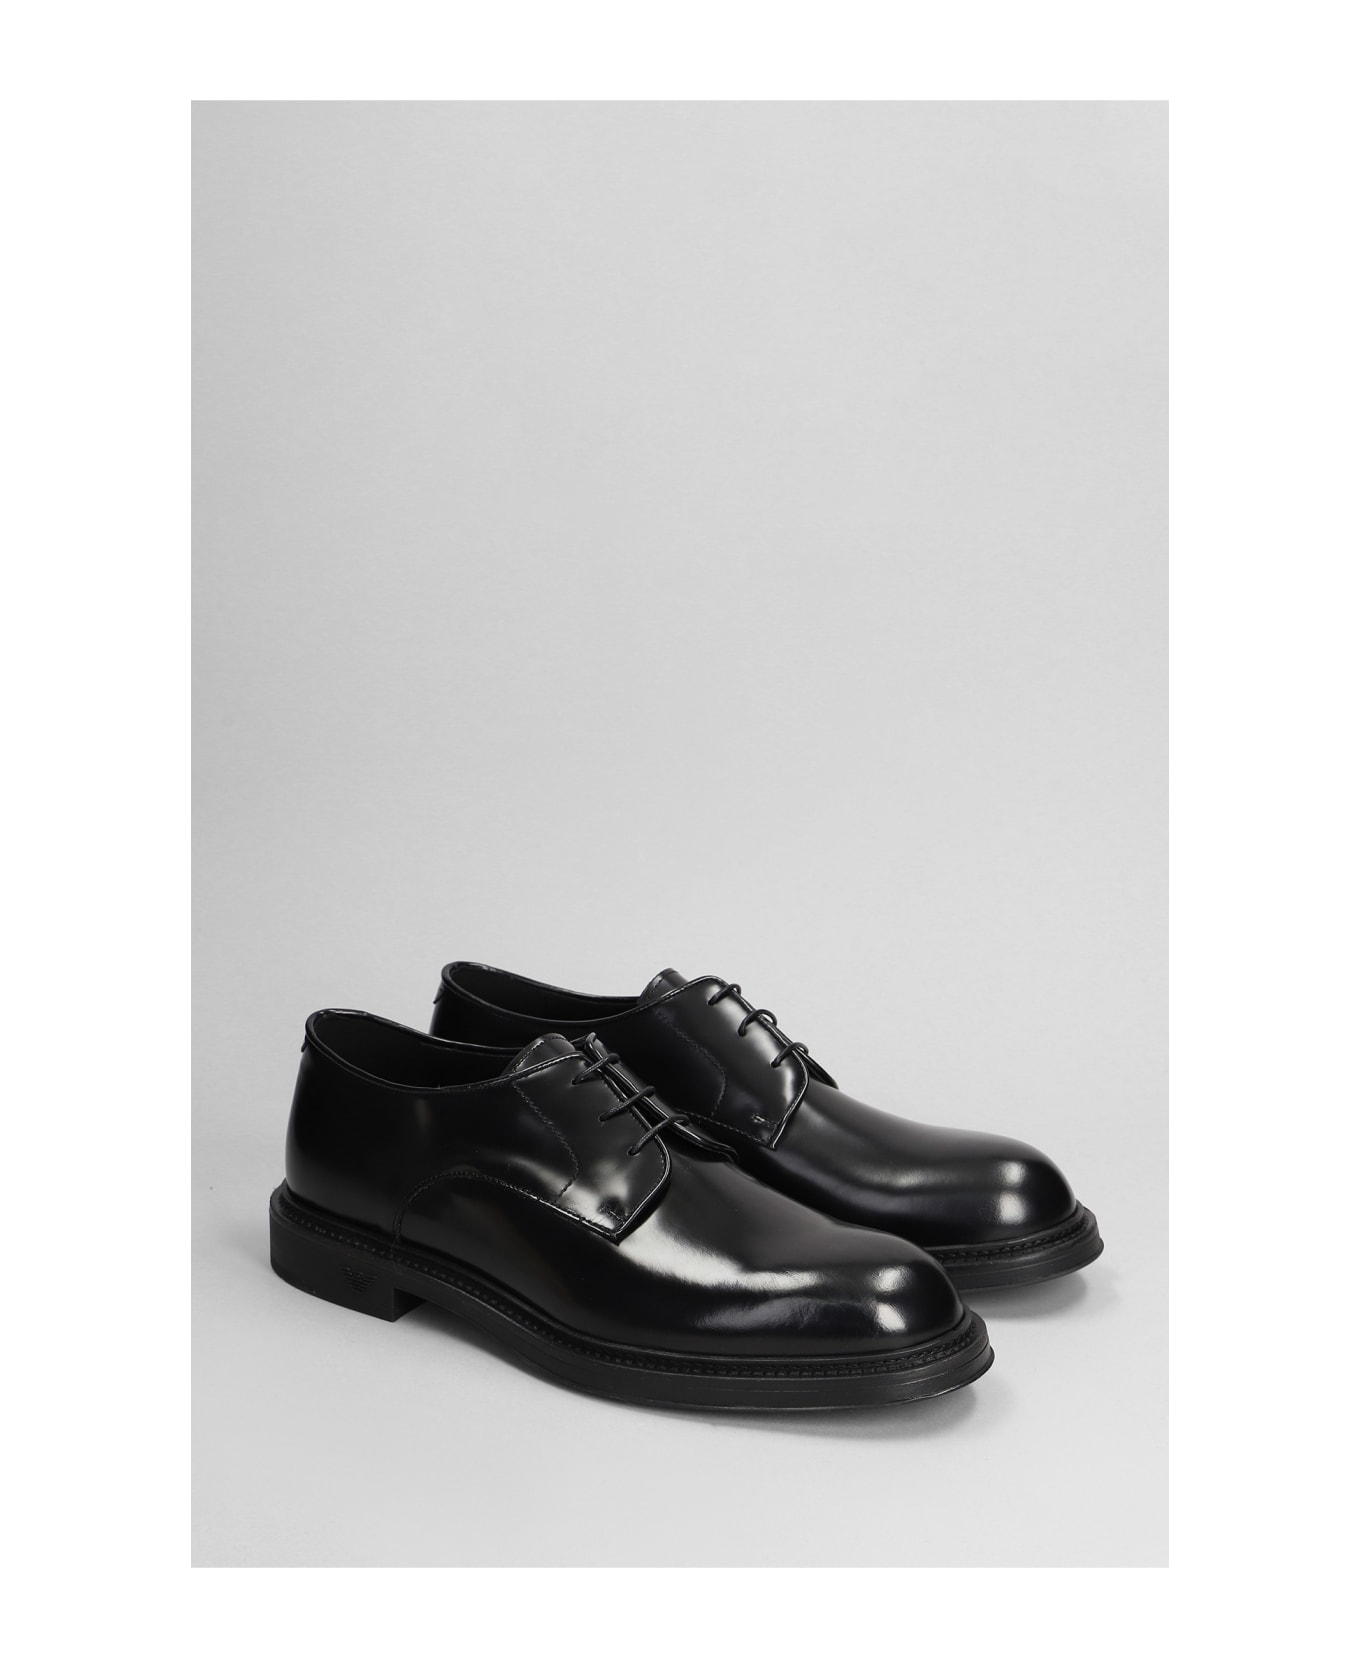 Emporio Armani Lace Up Shoes In Black Leather - black